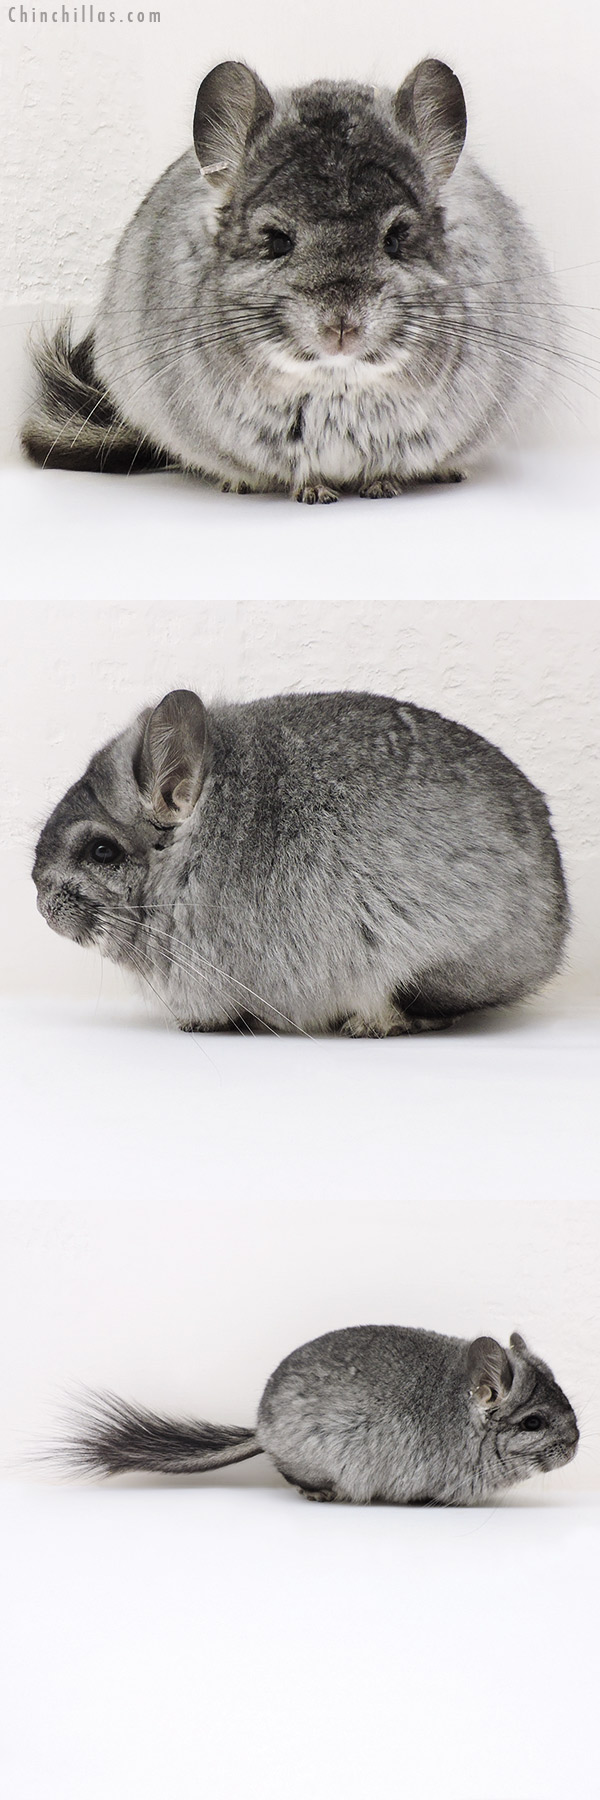 Chinchilla or related item offered for sale or export on Chinchillas.com - 17152 Exceptional Standard  Royal Persian Angora Female Chinchilla